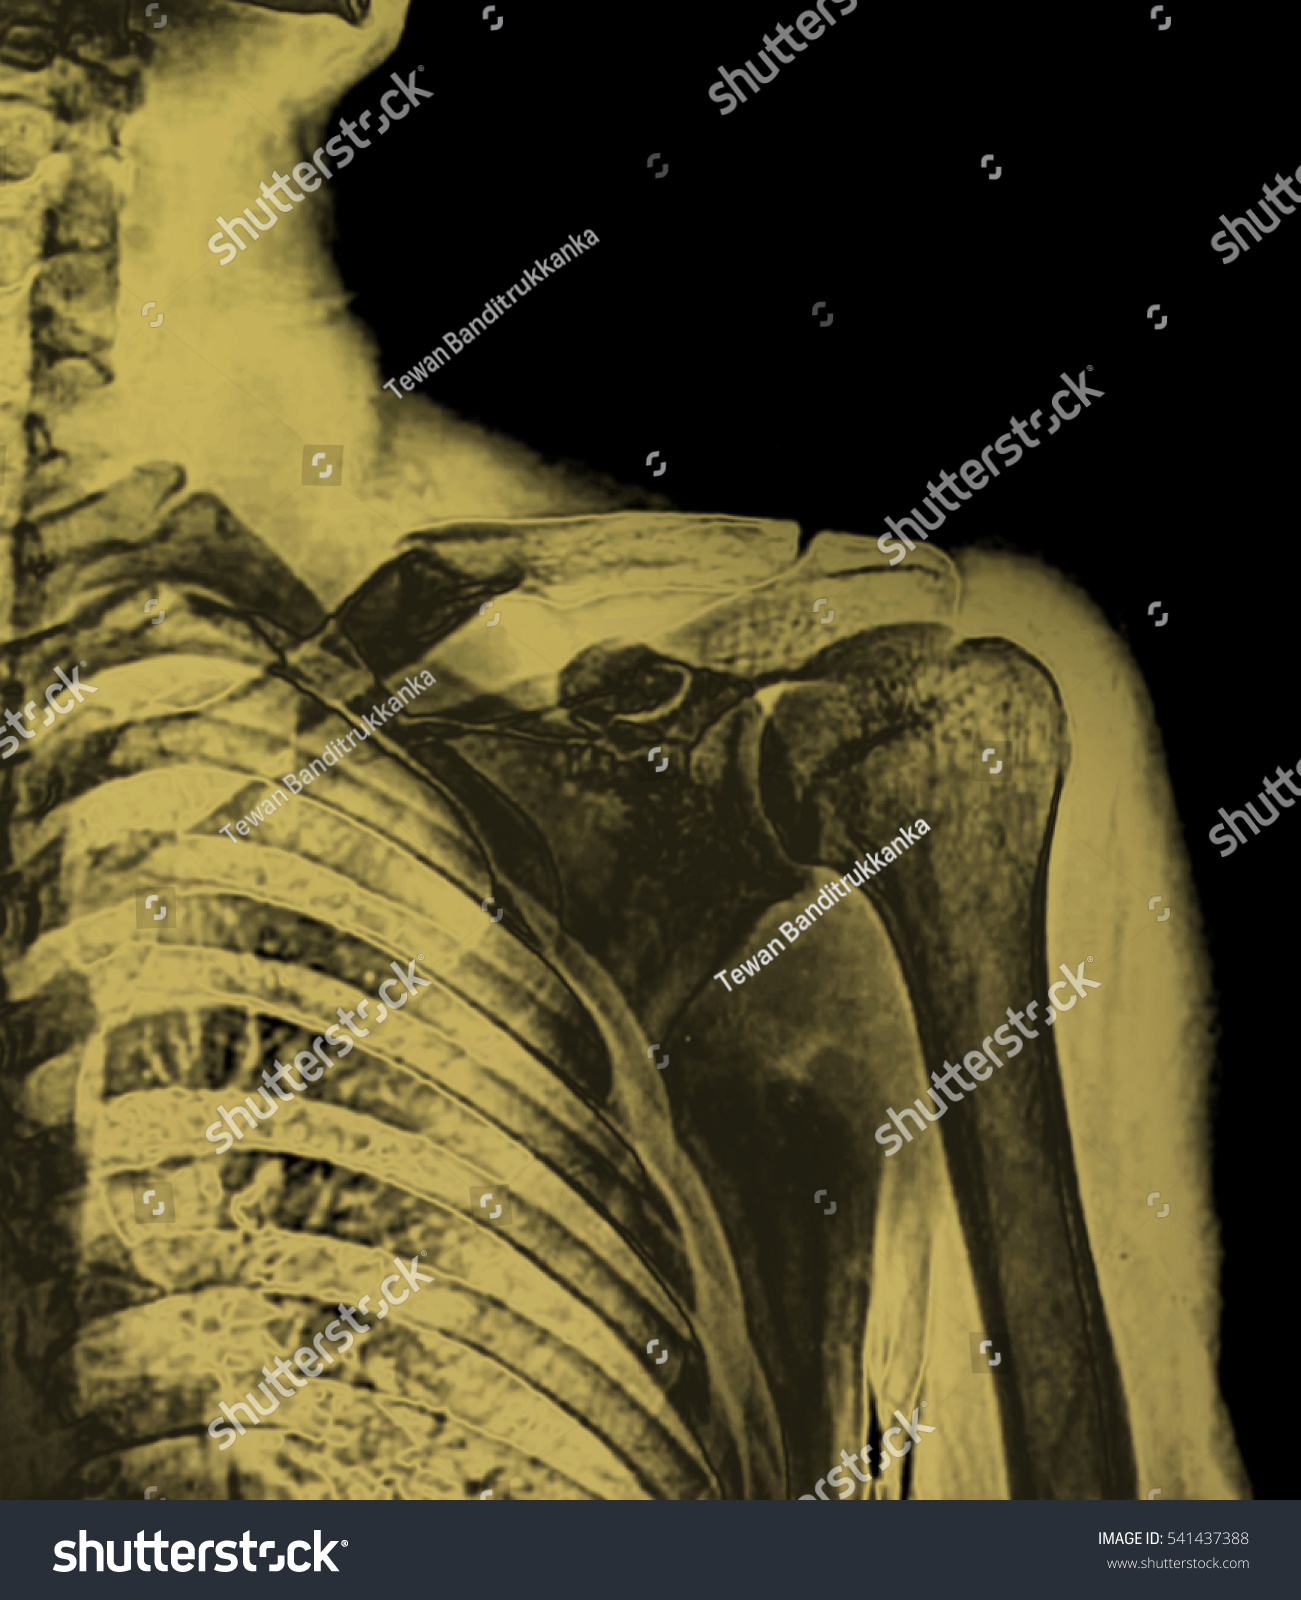 Edit Pictures Free Online - X-ray image | Shutterstock Editor